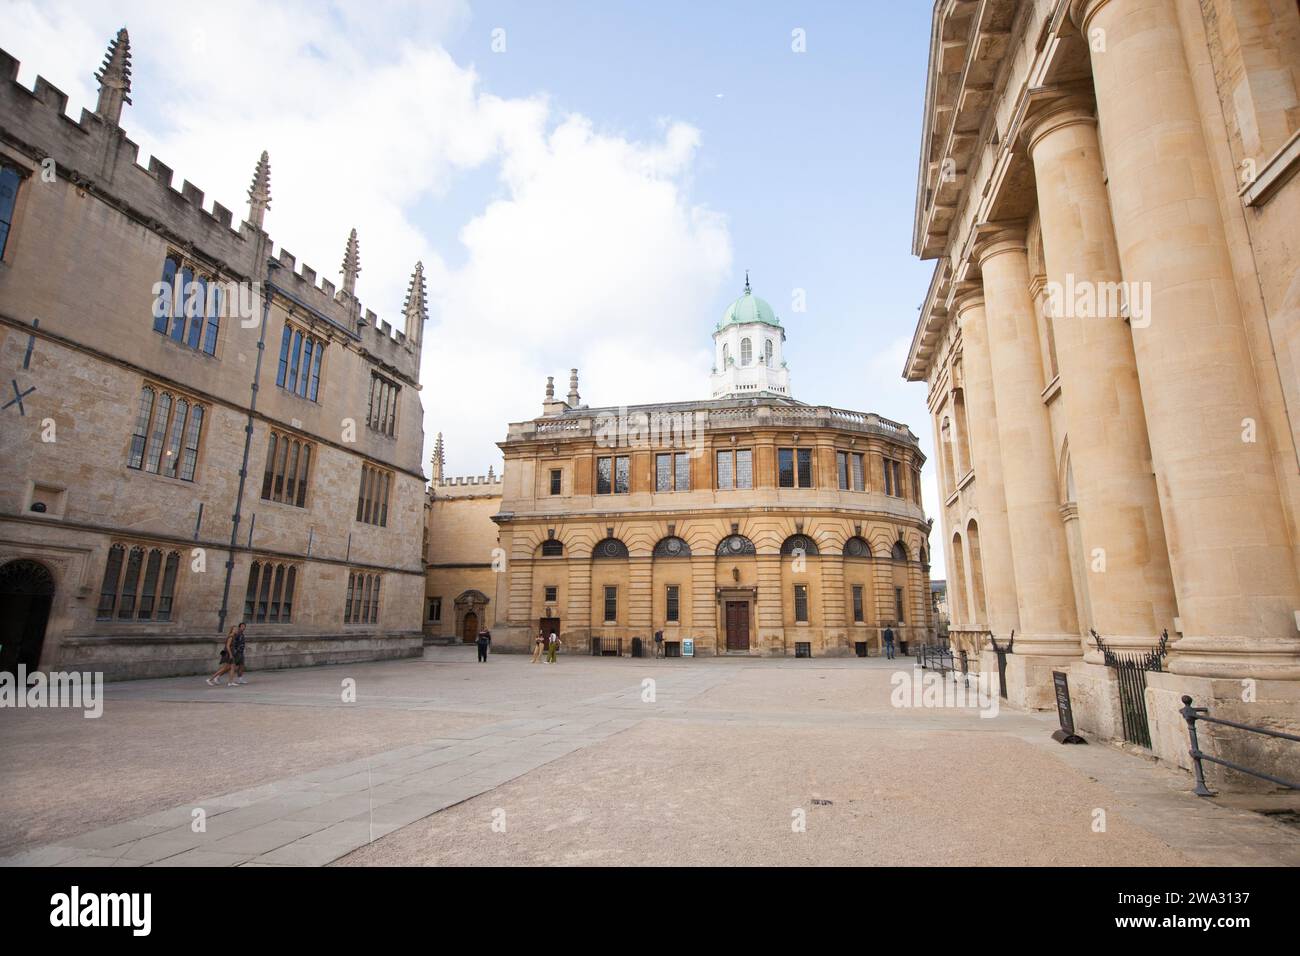 The Sheldonian Theatre and Bodleian Library part of The University of Oxford in the UK Stock Photo